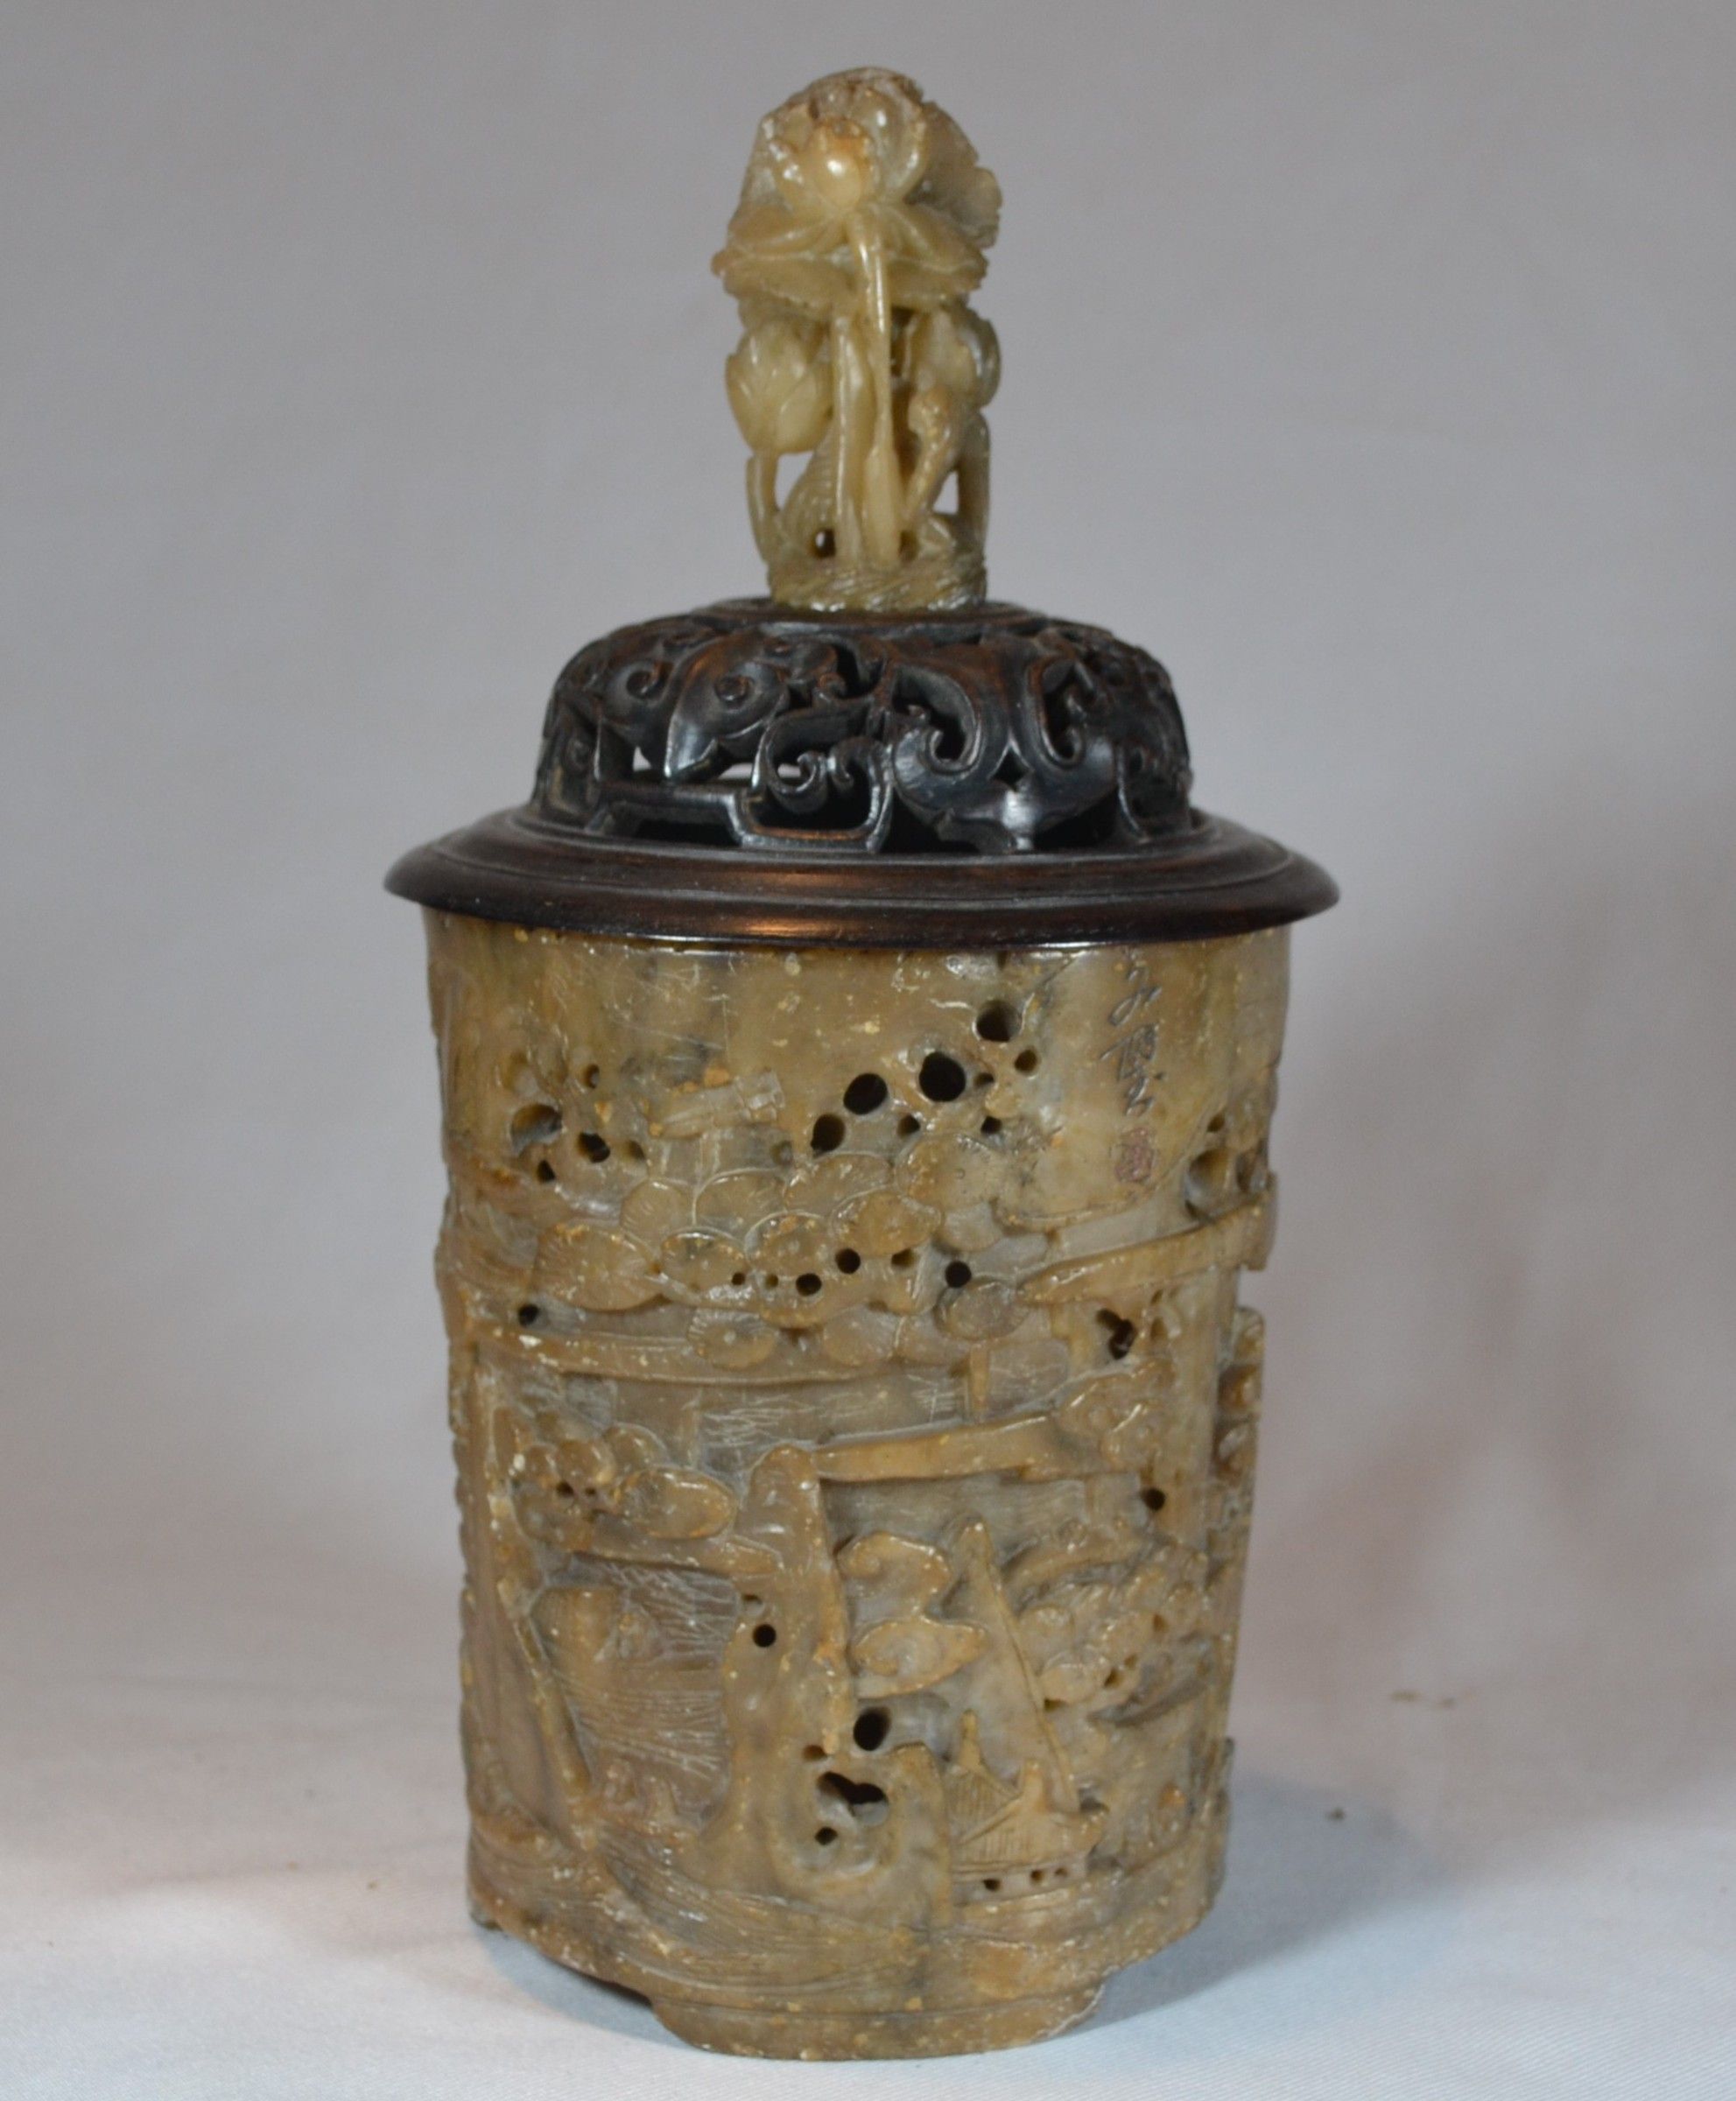 Soapstone censer or brushpot. Qing period 17-19th.